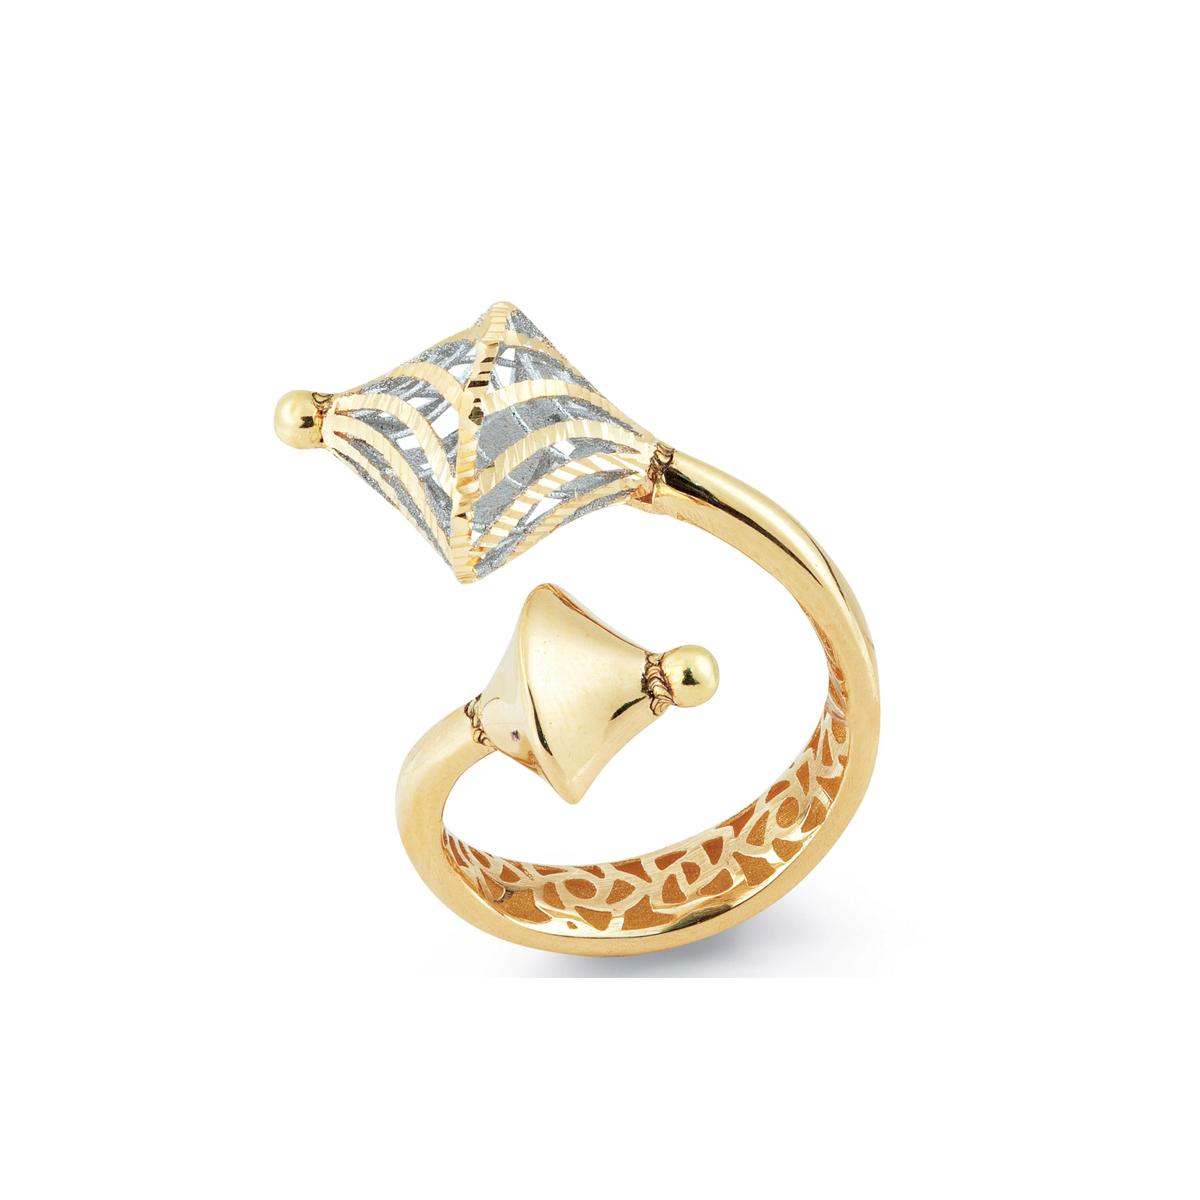 Contrariè ring in 18kt two-tone gold - AE4300-LN